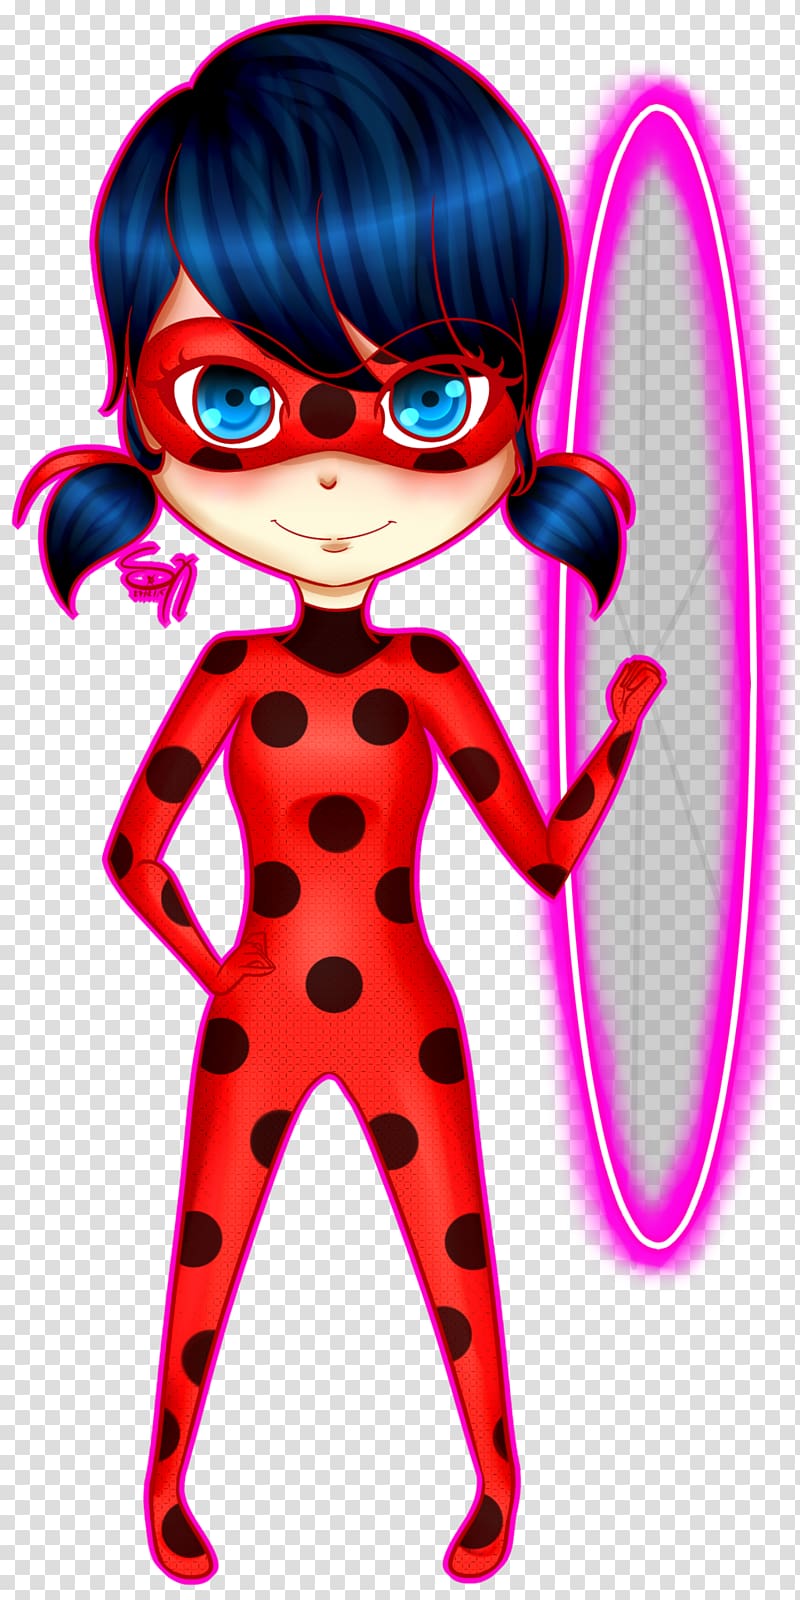 standing Incredible character illustration, Adrien Agreste Drawing YouTube Caricature, lady bug transparent background PNG clipart